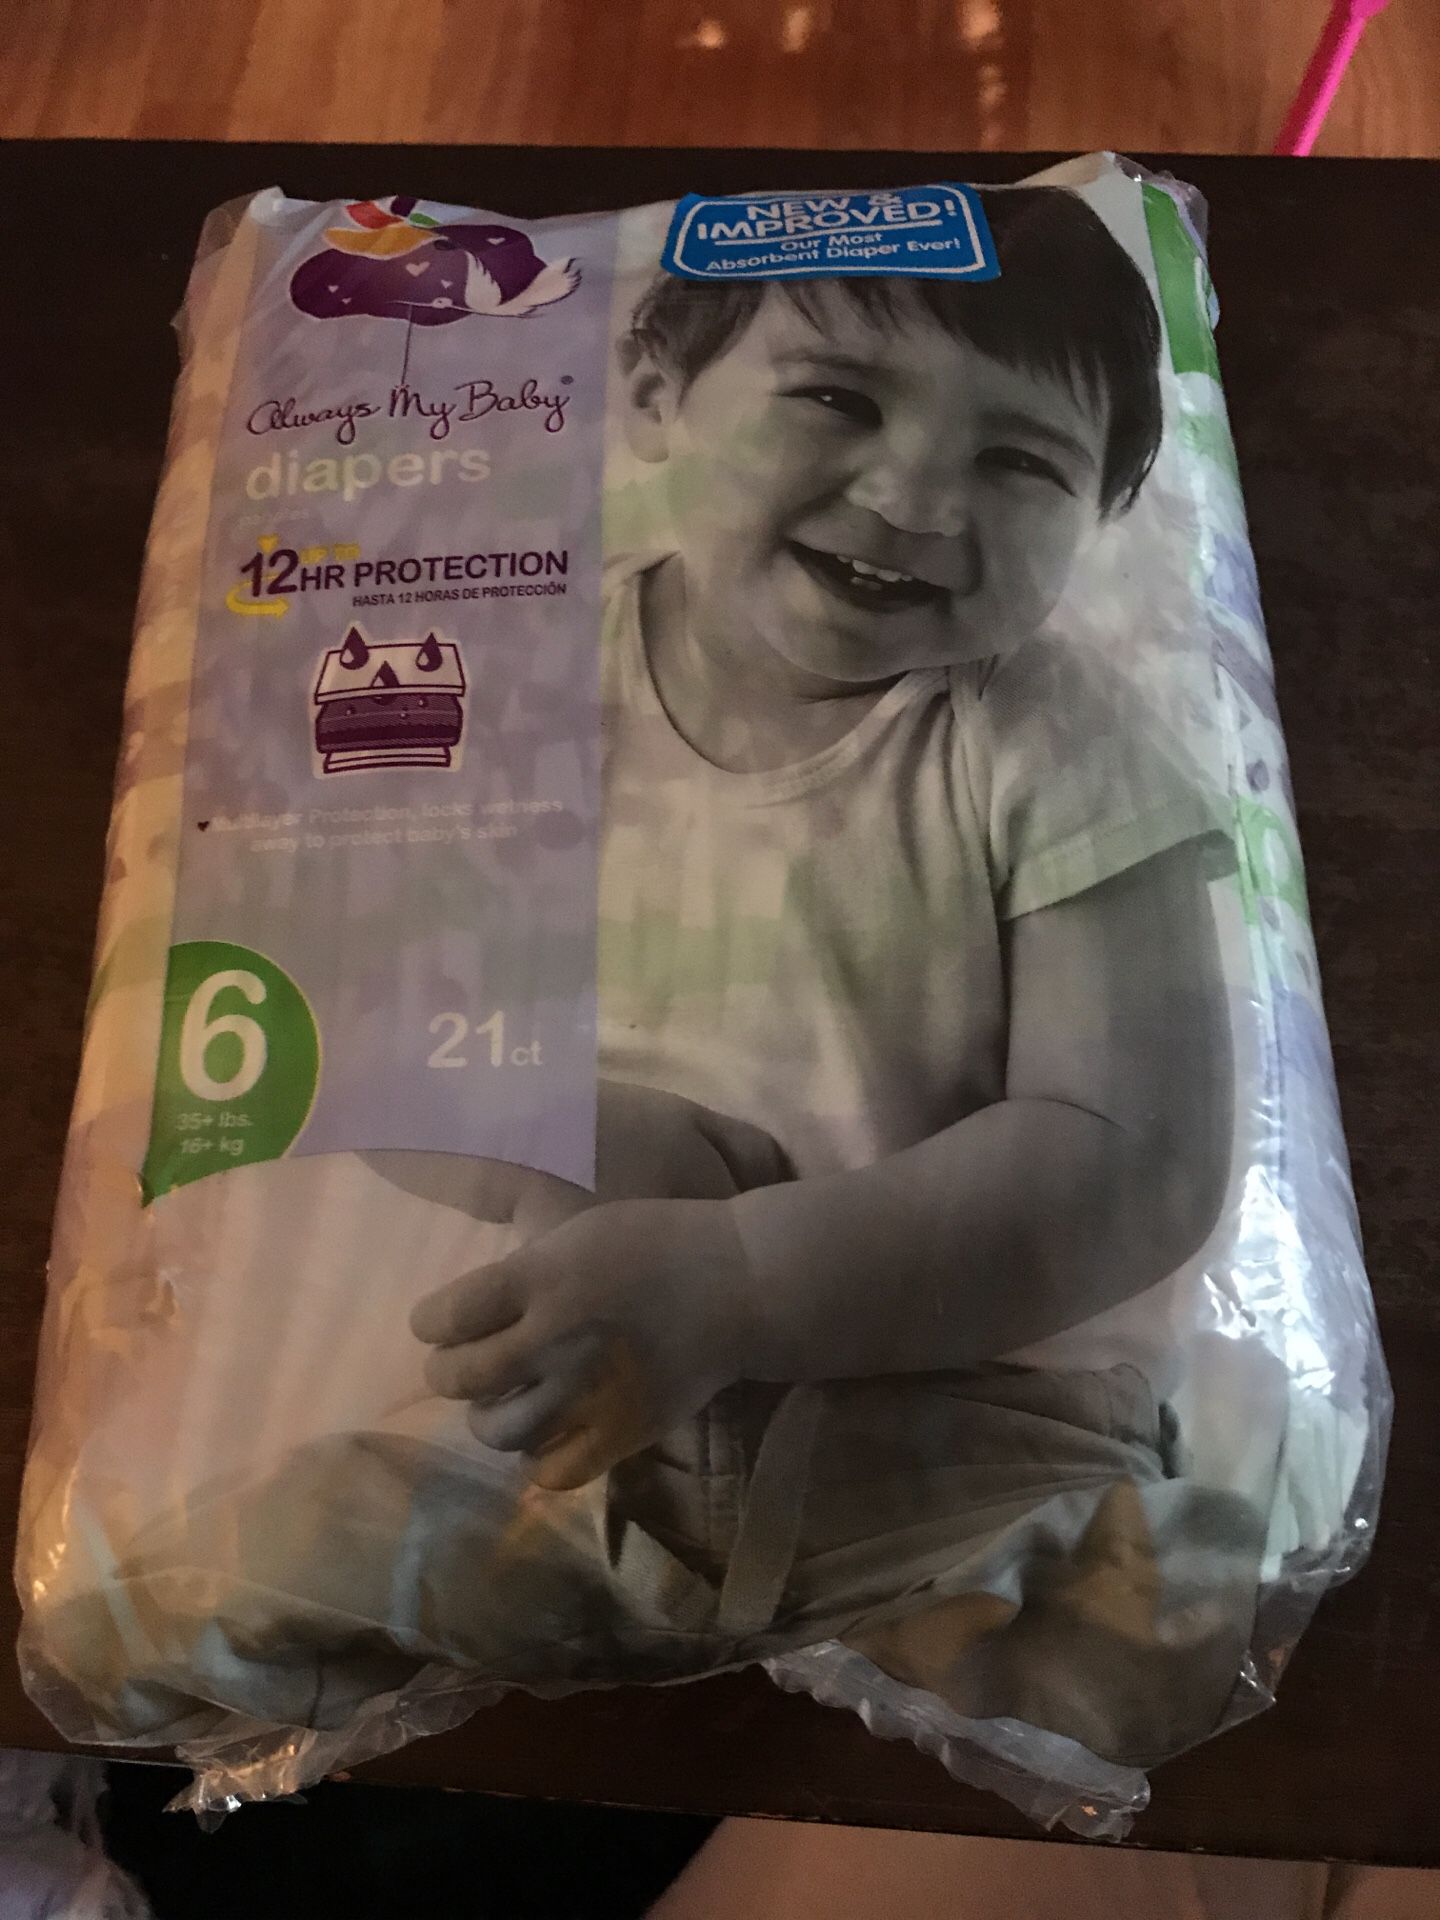 Giant Always my baby diapers size 6 (21 count)